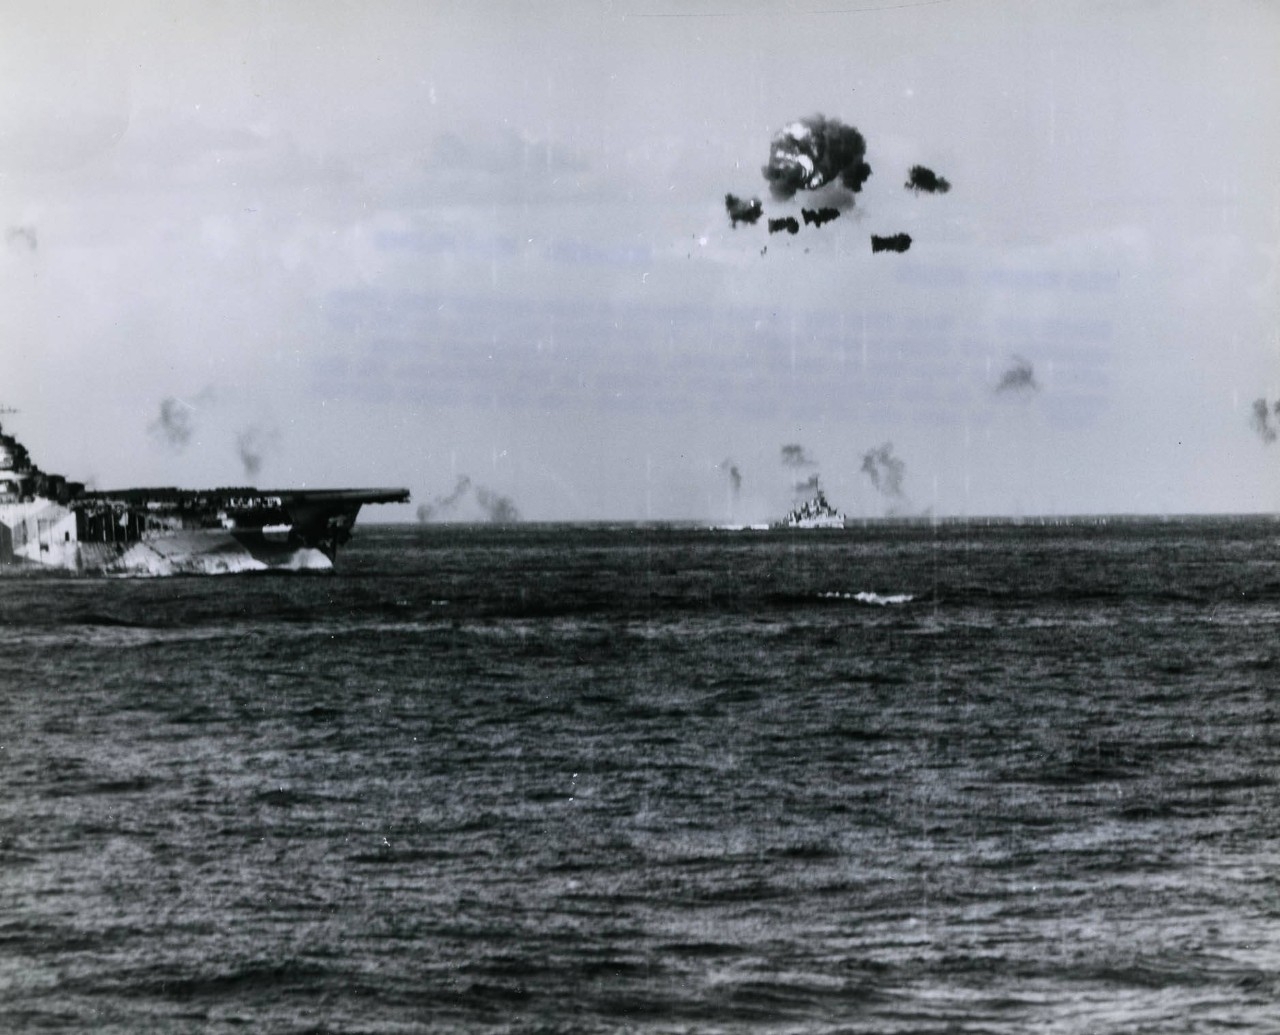 antiaircraft fire from ships of TF 38